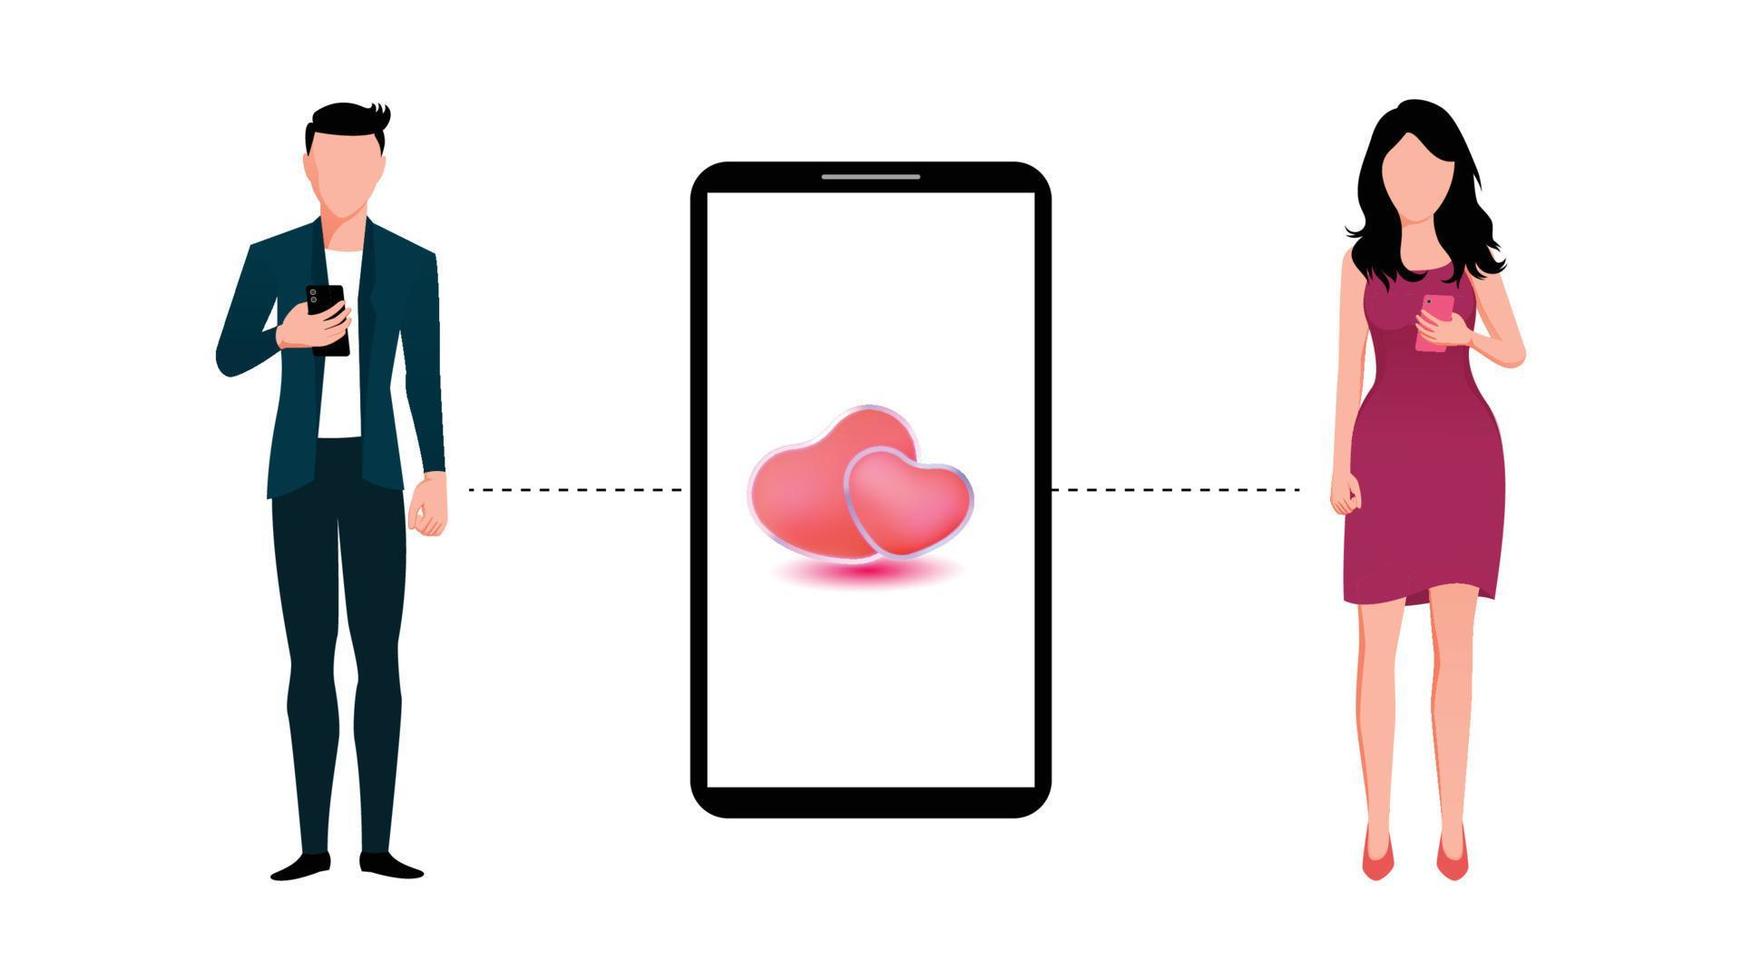 Online dating app couple matched flat character vector illustration with heart object in smartphone